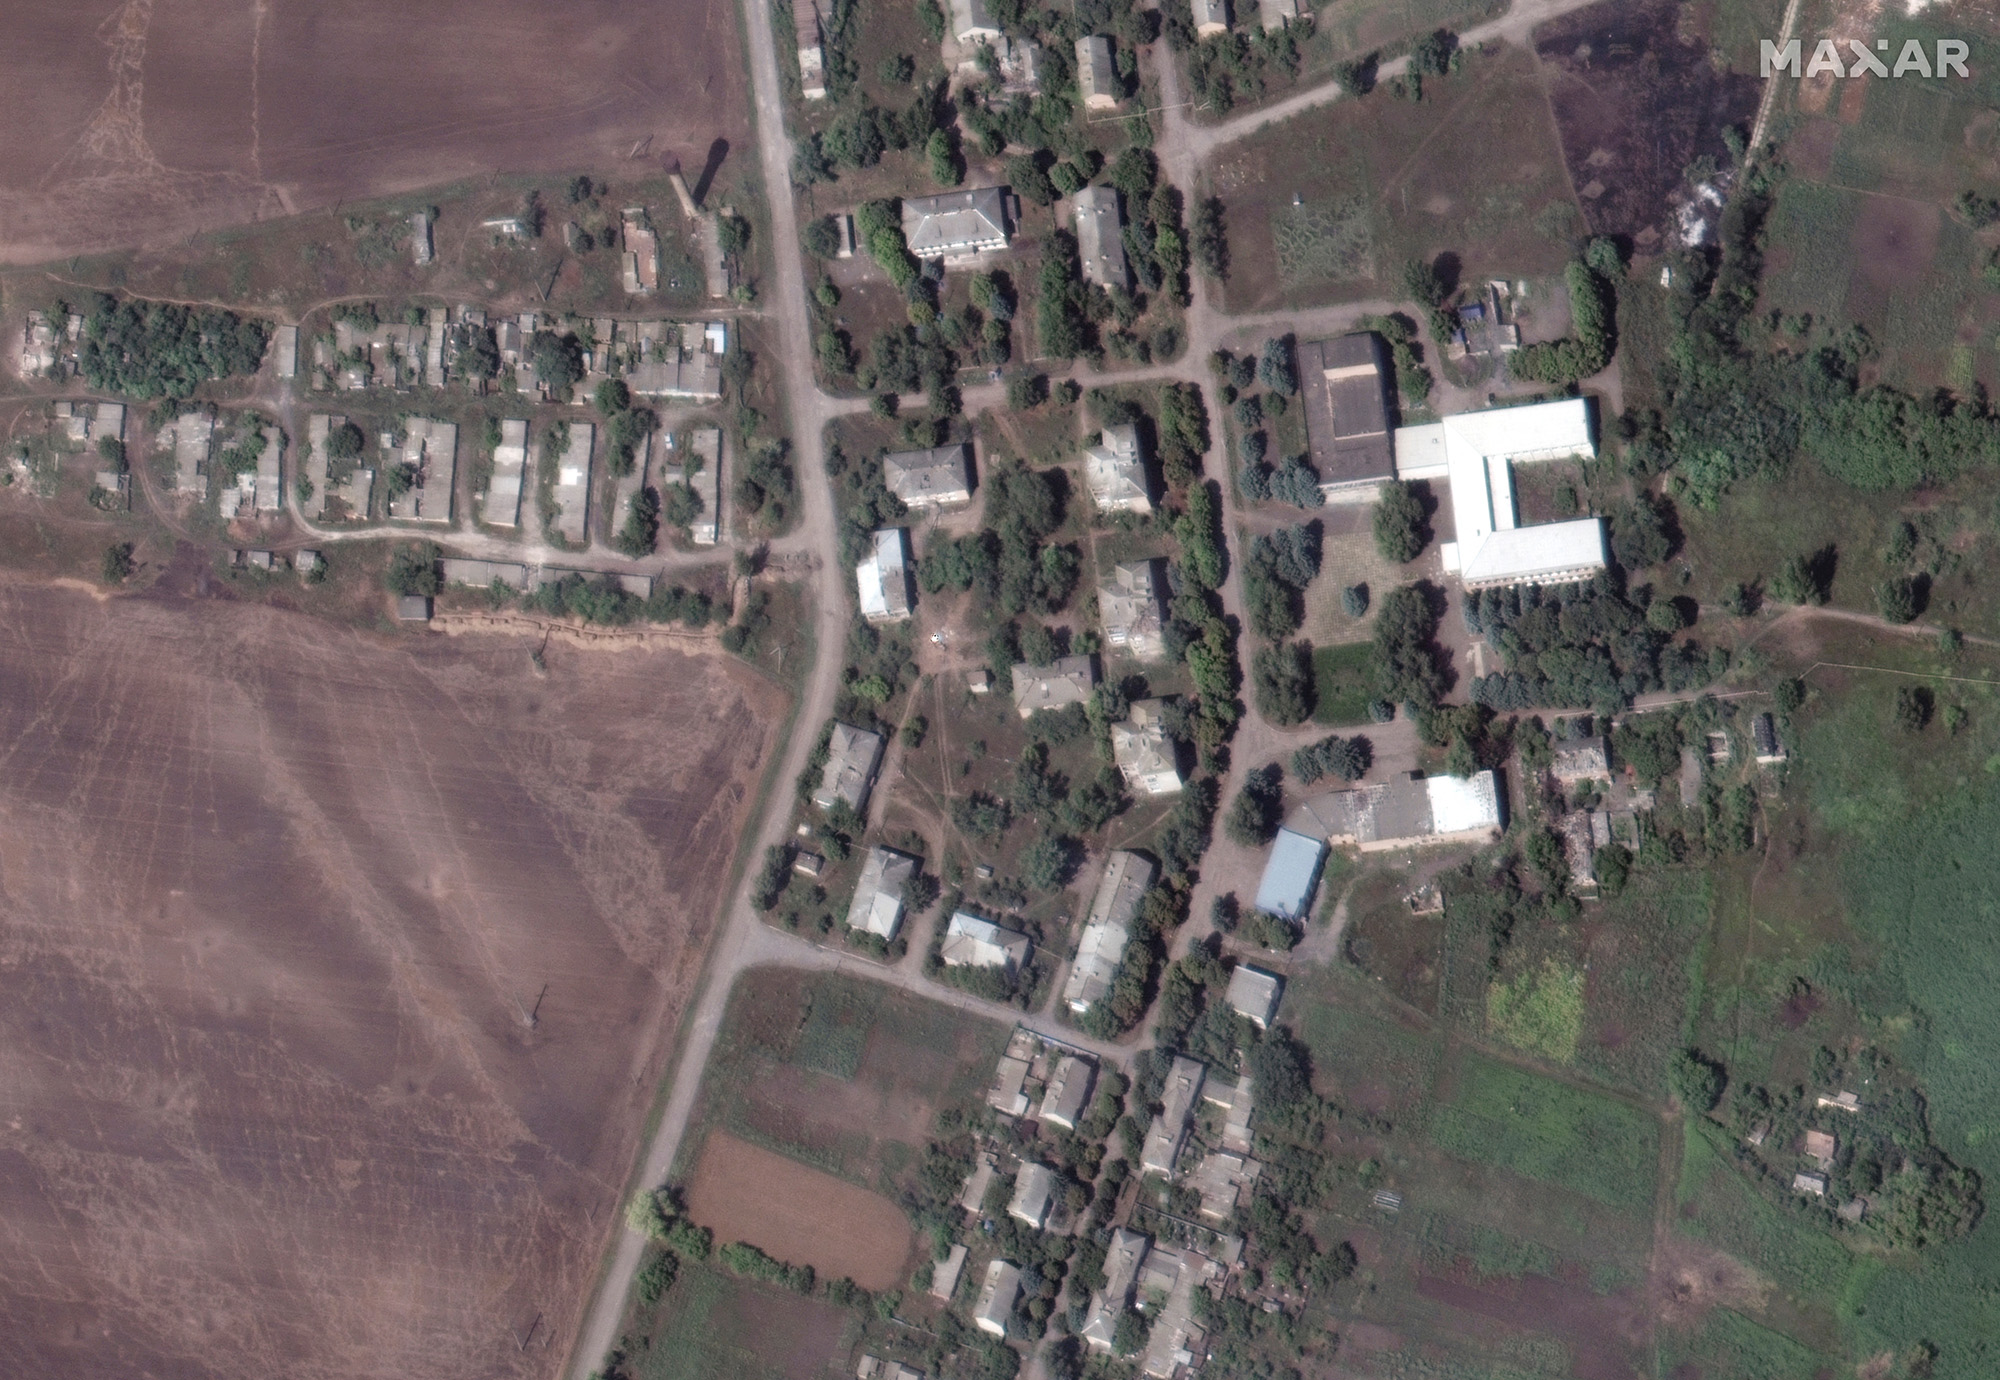 A satellite view shows a school and buildings, in south Soledar, Ukraine, on August 1, 2022.